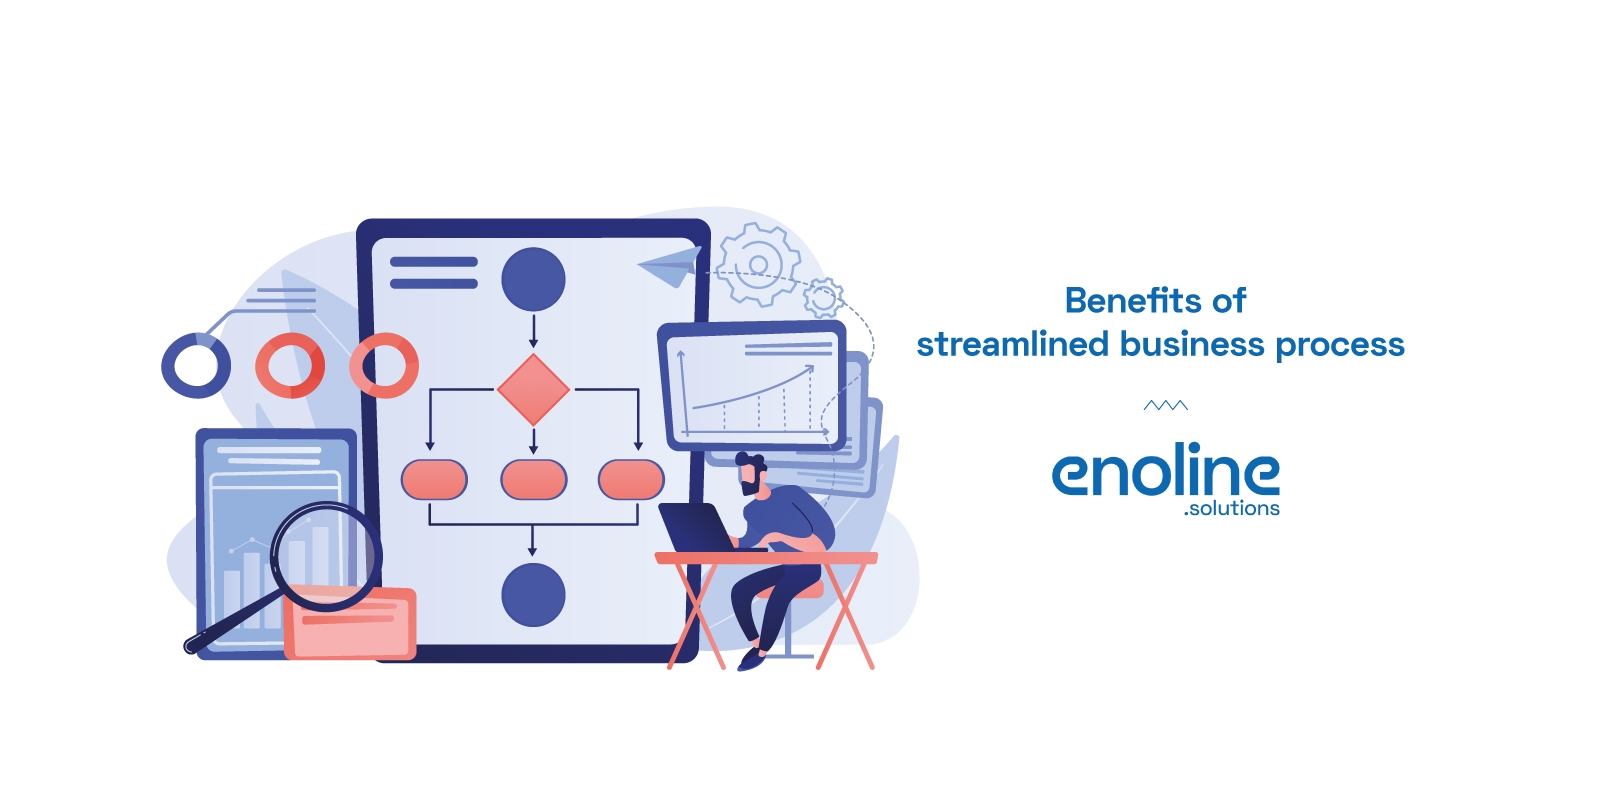 Benefits of streamlined business process enoline